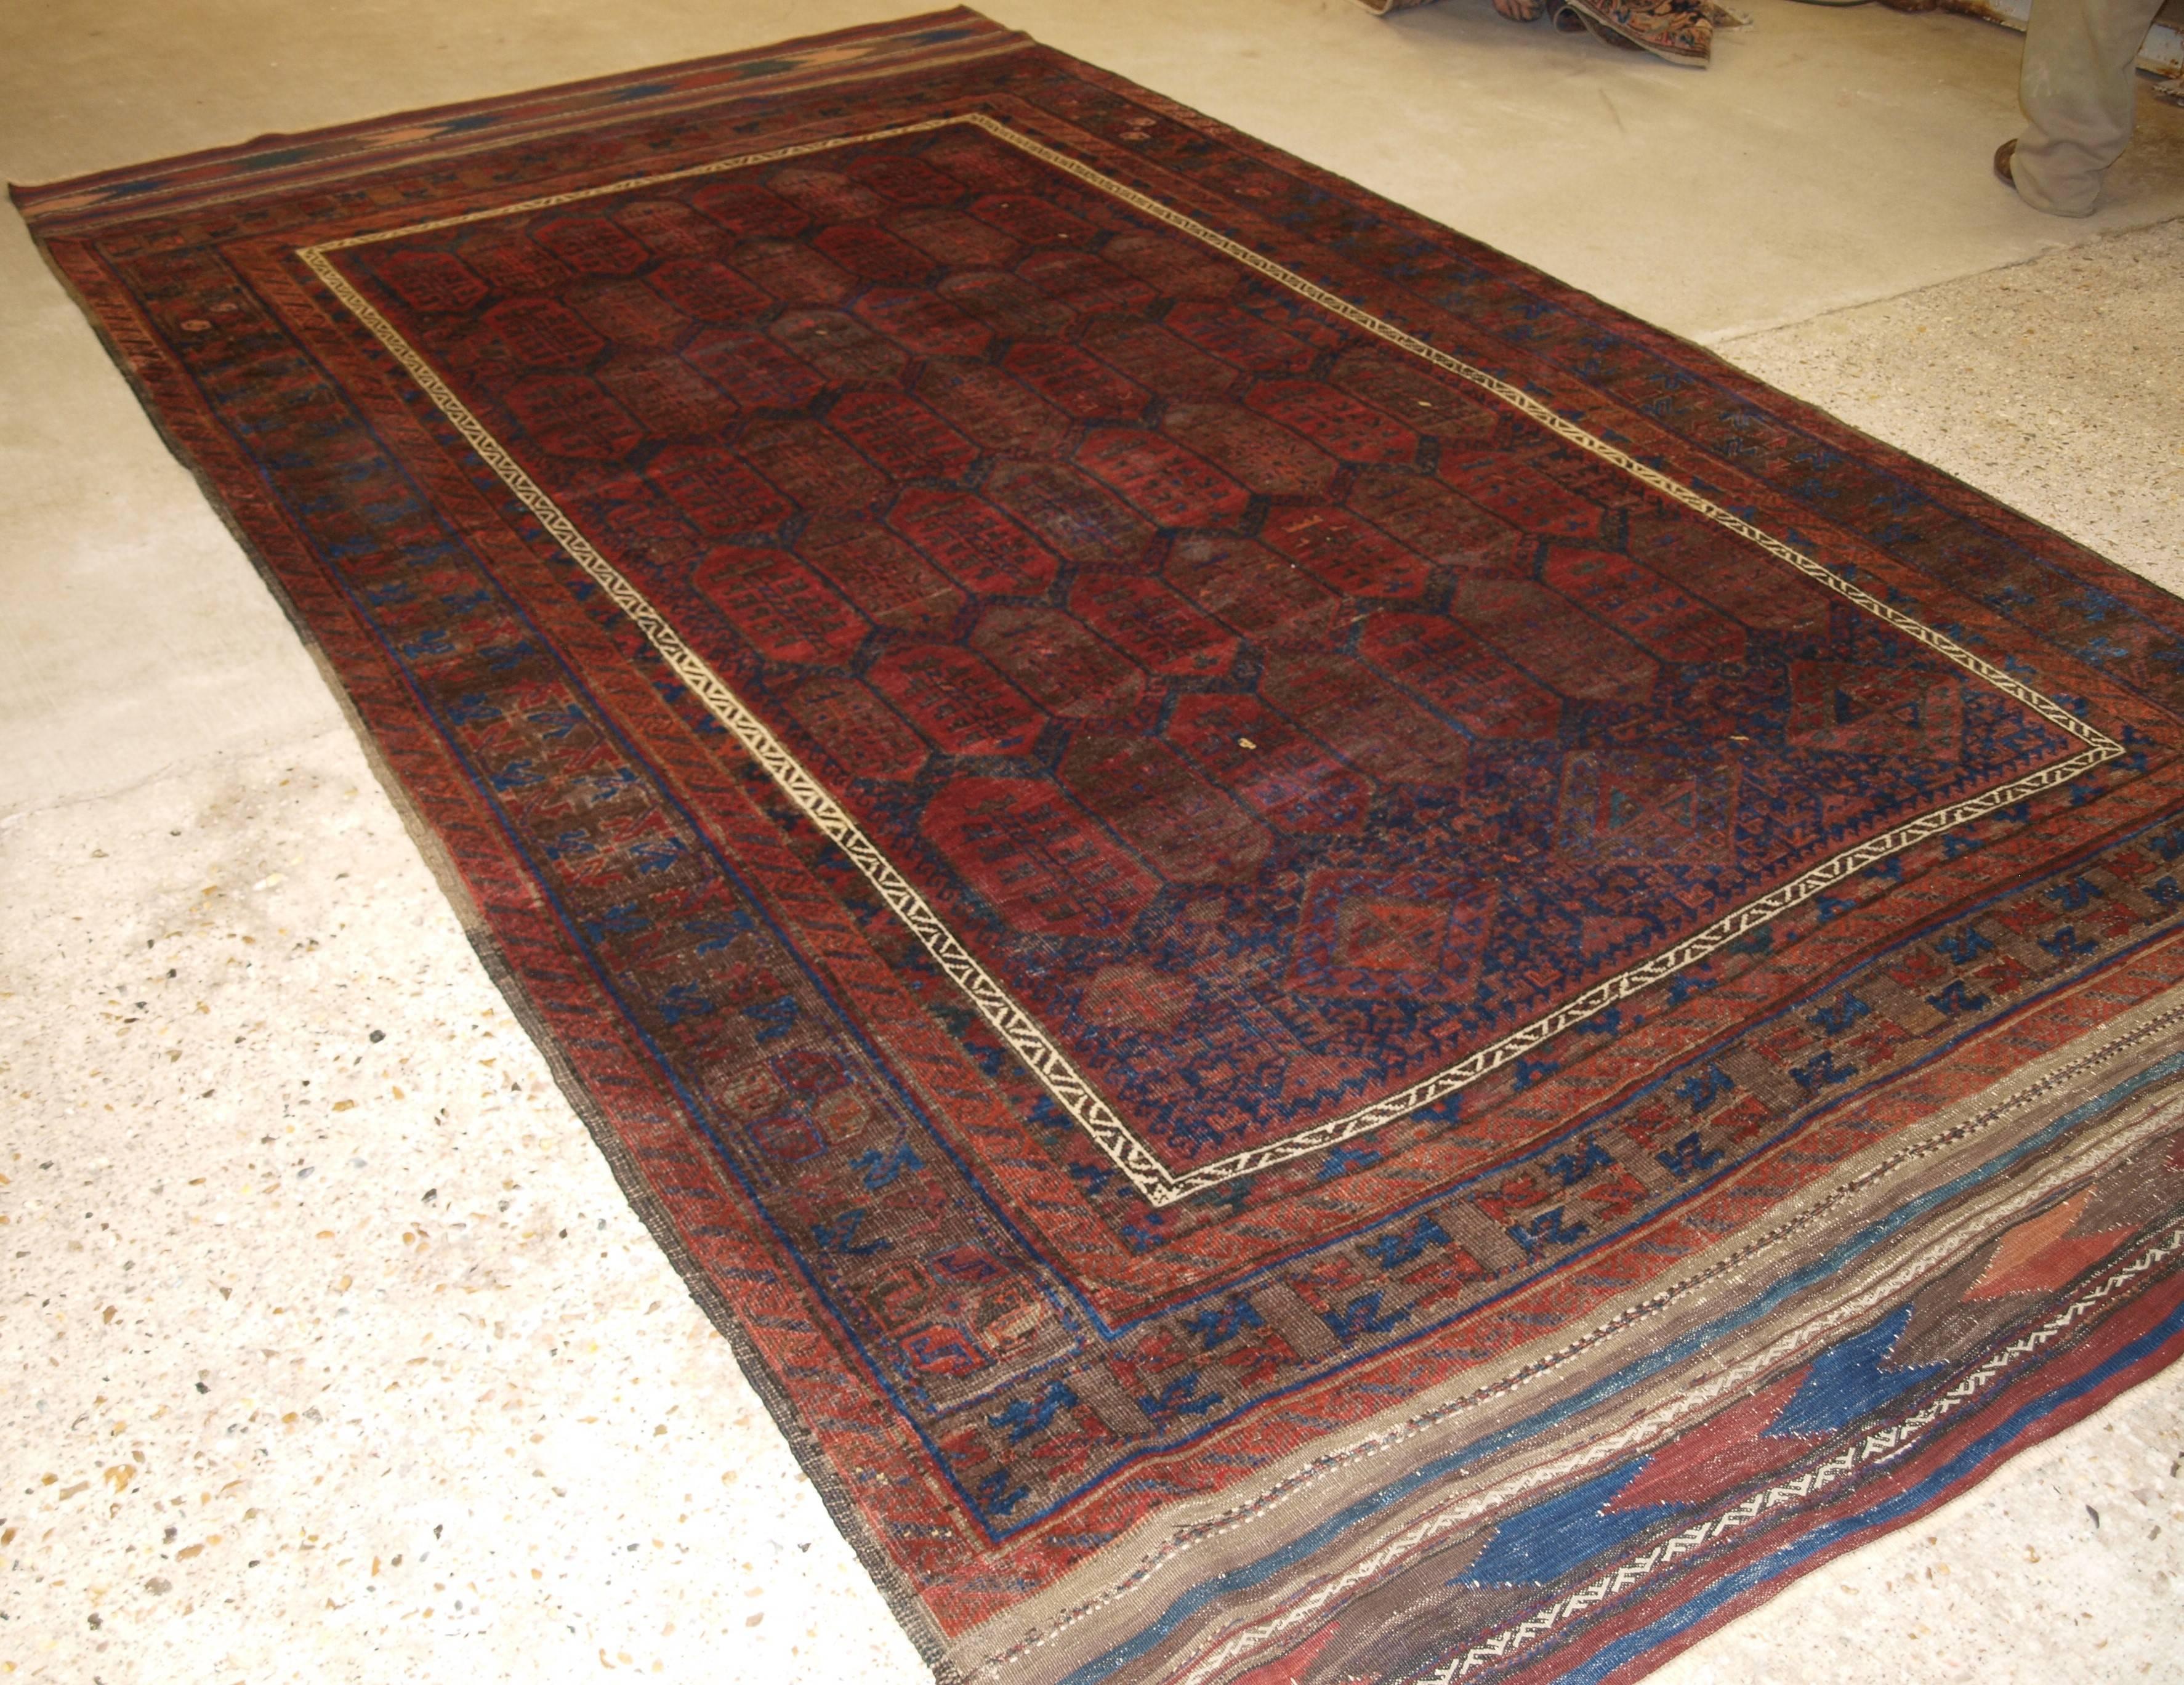 Size: 12ft 2in x 6ft 7in (370 x 200cm).

A good antique main carpet by the Baluch of western Afghanistan. The carpet is of the shrub design with a traditional Baluch border, 

circa 1870.

The carpet has the traditional dark indigo ground and